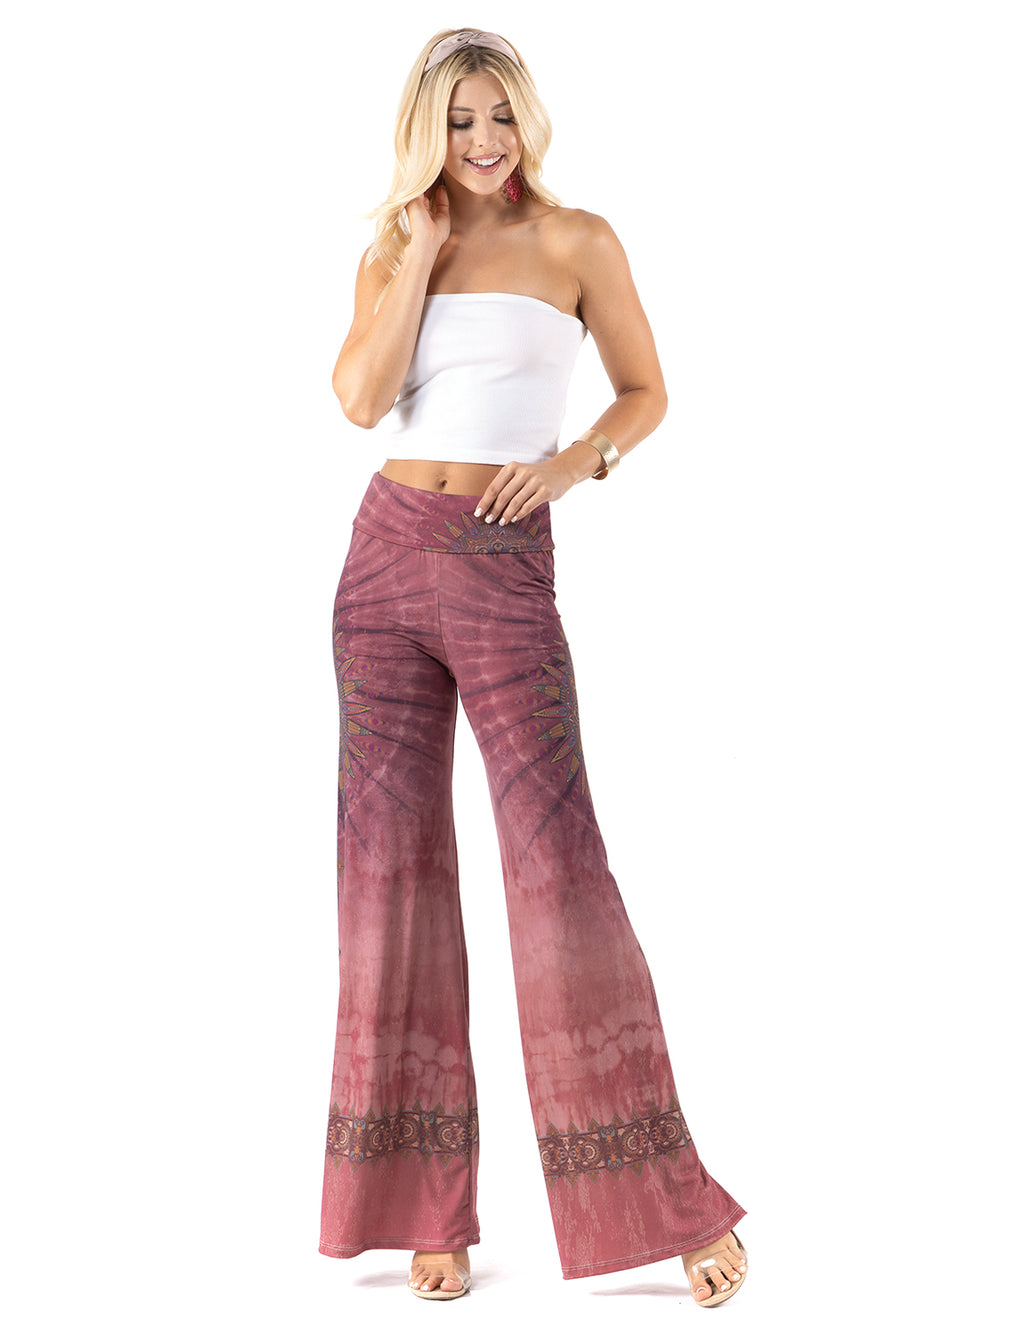 Beautiful woman wearing this amazing Deep lavender with Circular emblem High waist palazzo pants featuring pockets, wide legs, and a comfortable stretchy fabric ,Perfect during spring, summer,Concerts, Festivals, Dance, Brunch